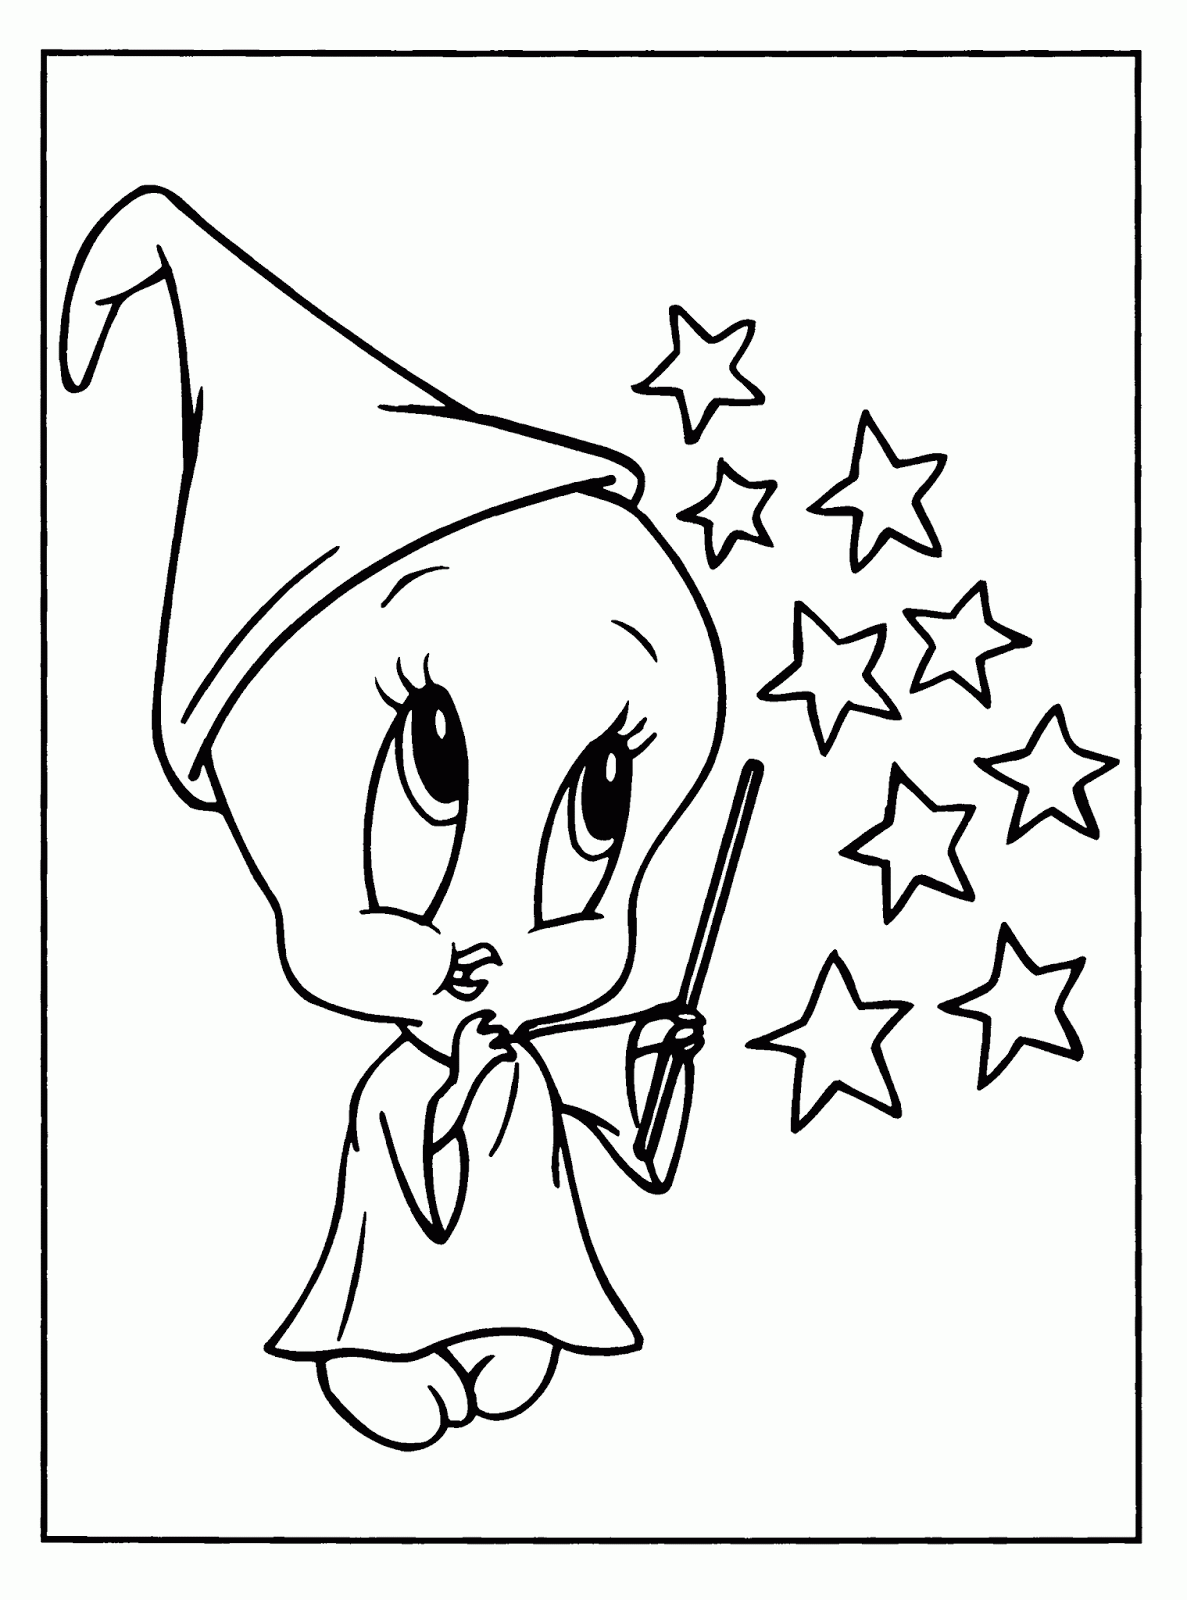 looney tunes colouring pages cartoon design yosemite sam coloring pages by looney tunes tunes pages looney colouring 